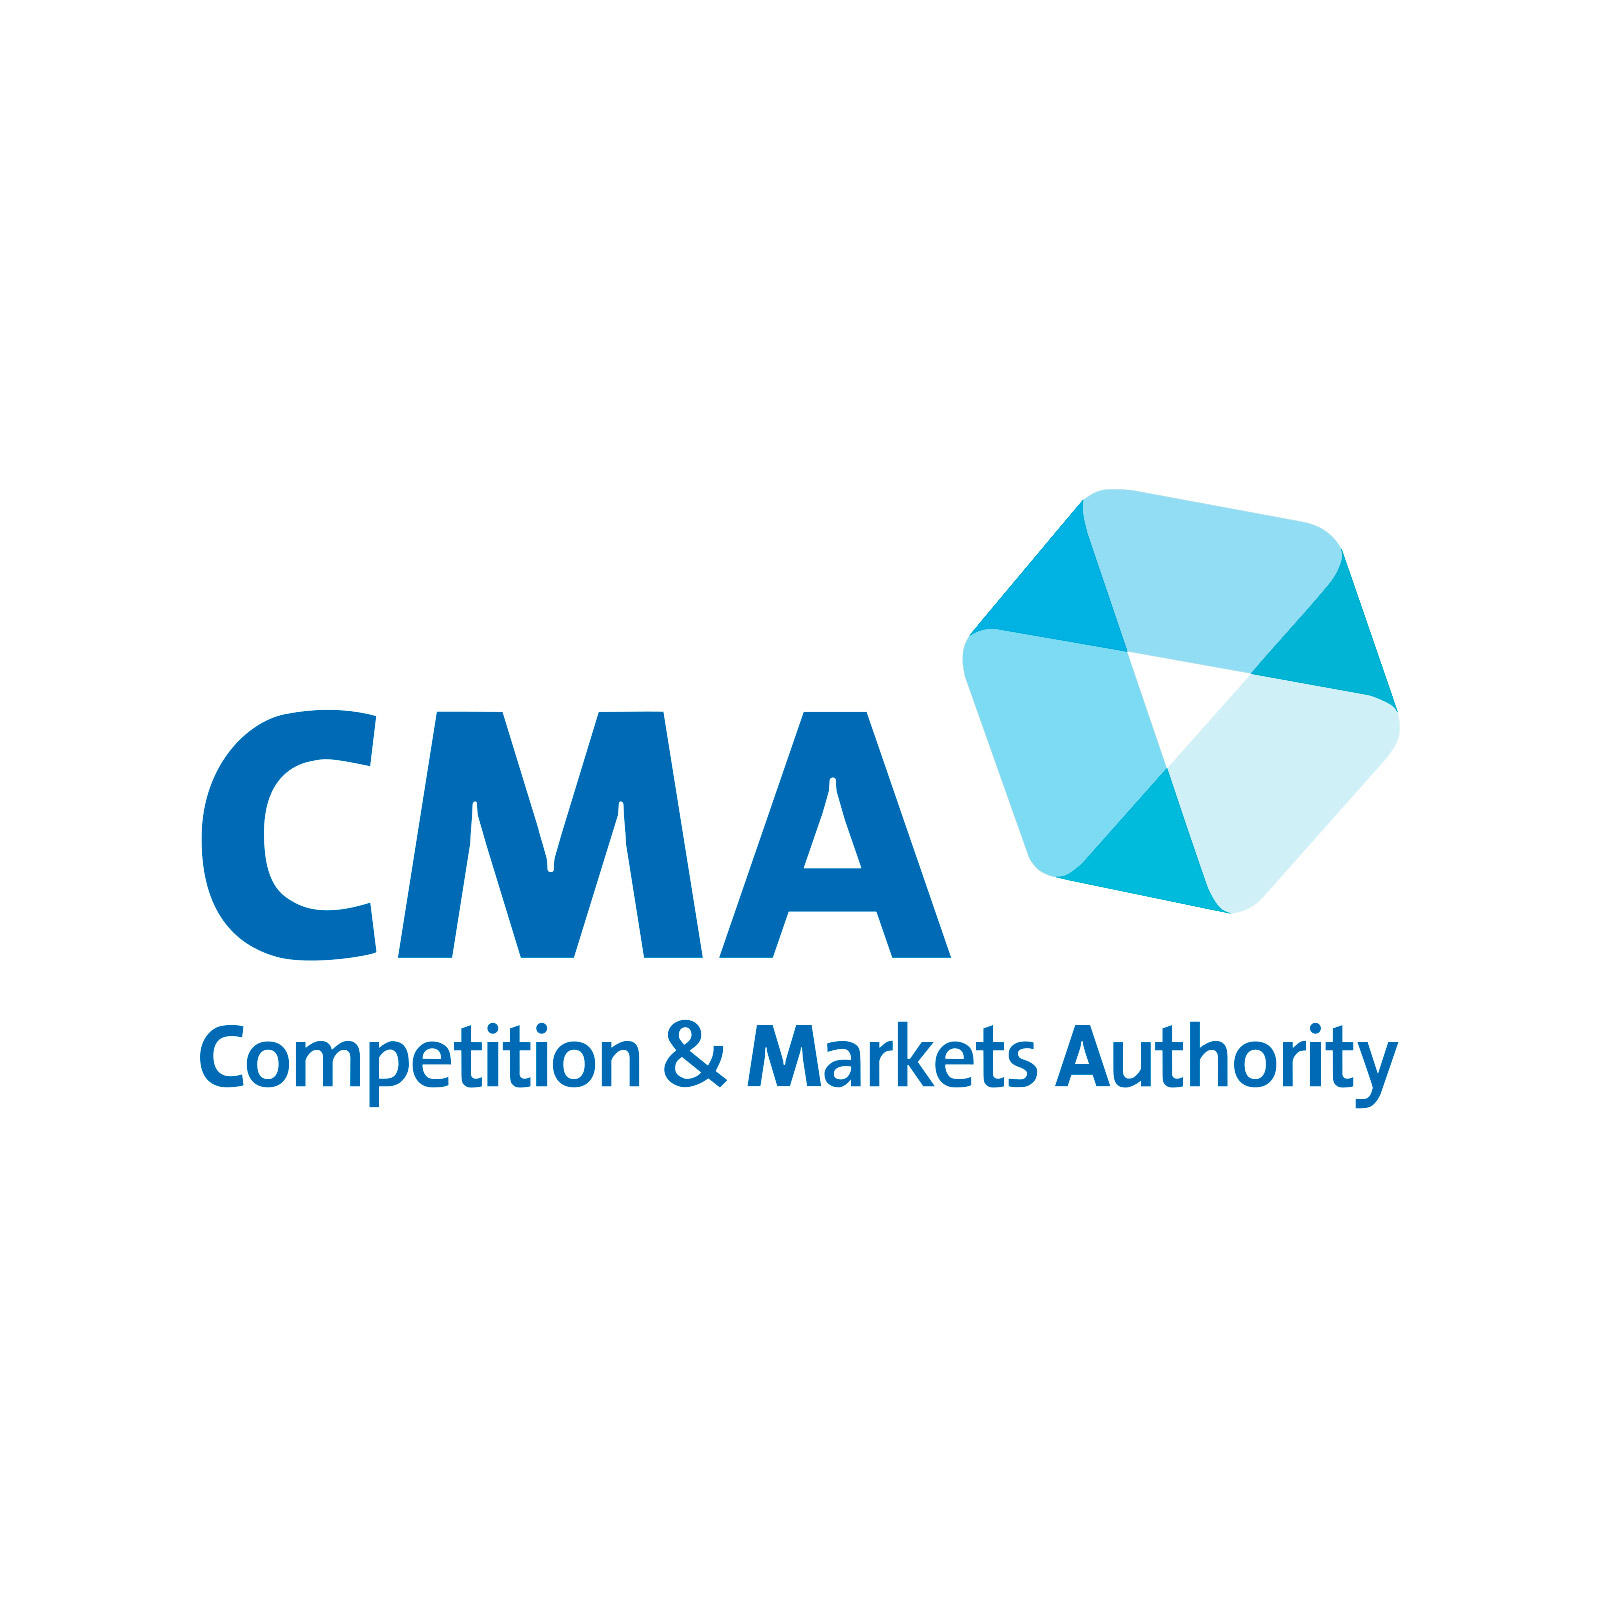 Spotlight on the UK’s Competition & Markets Authority